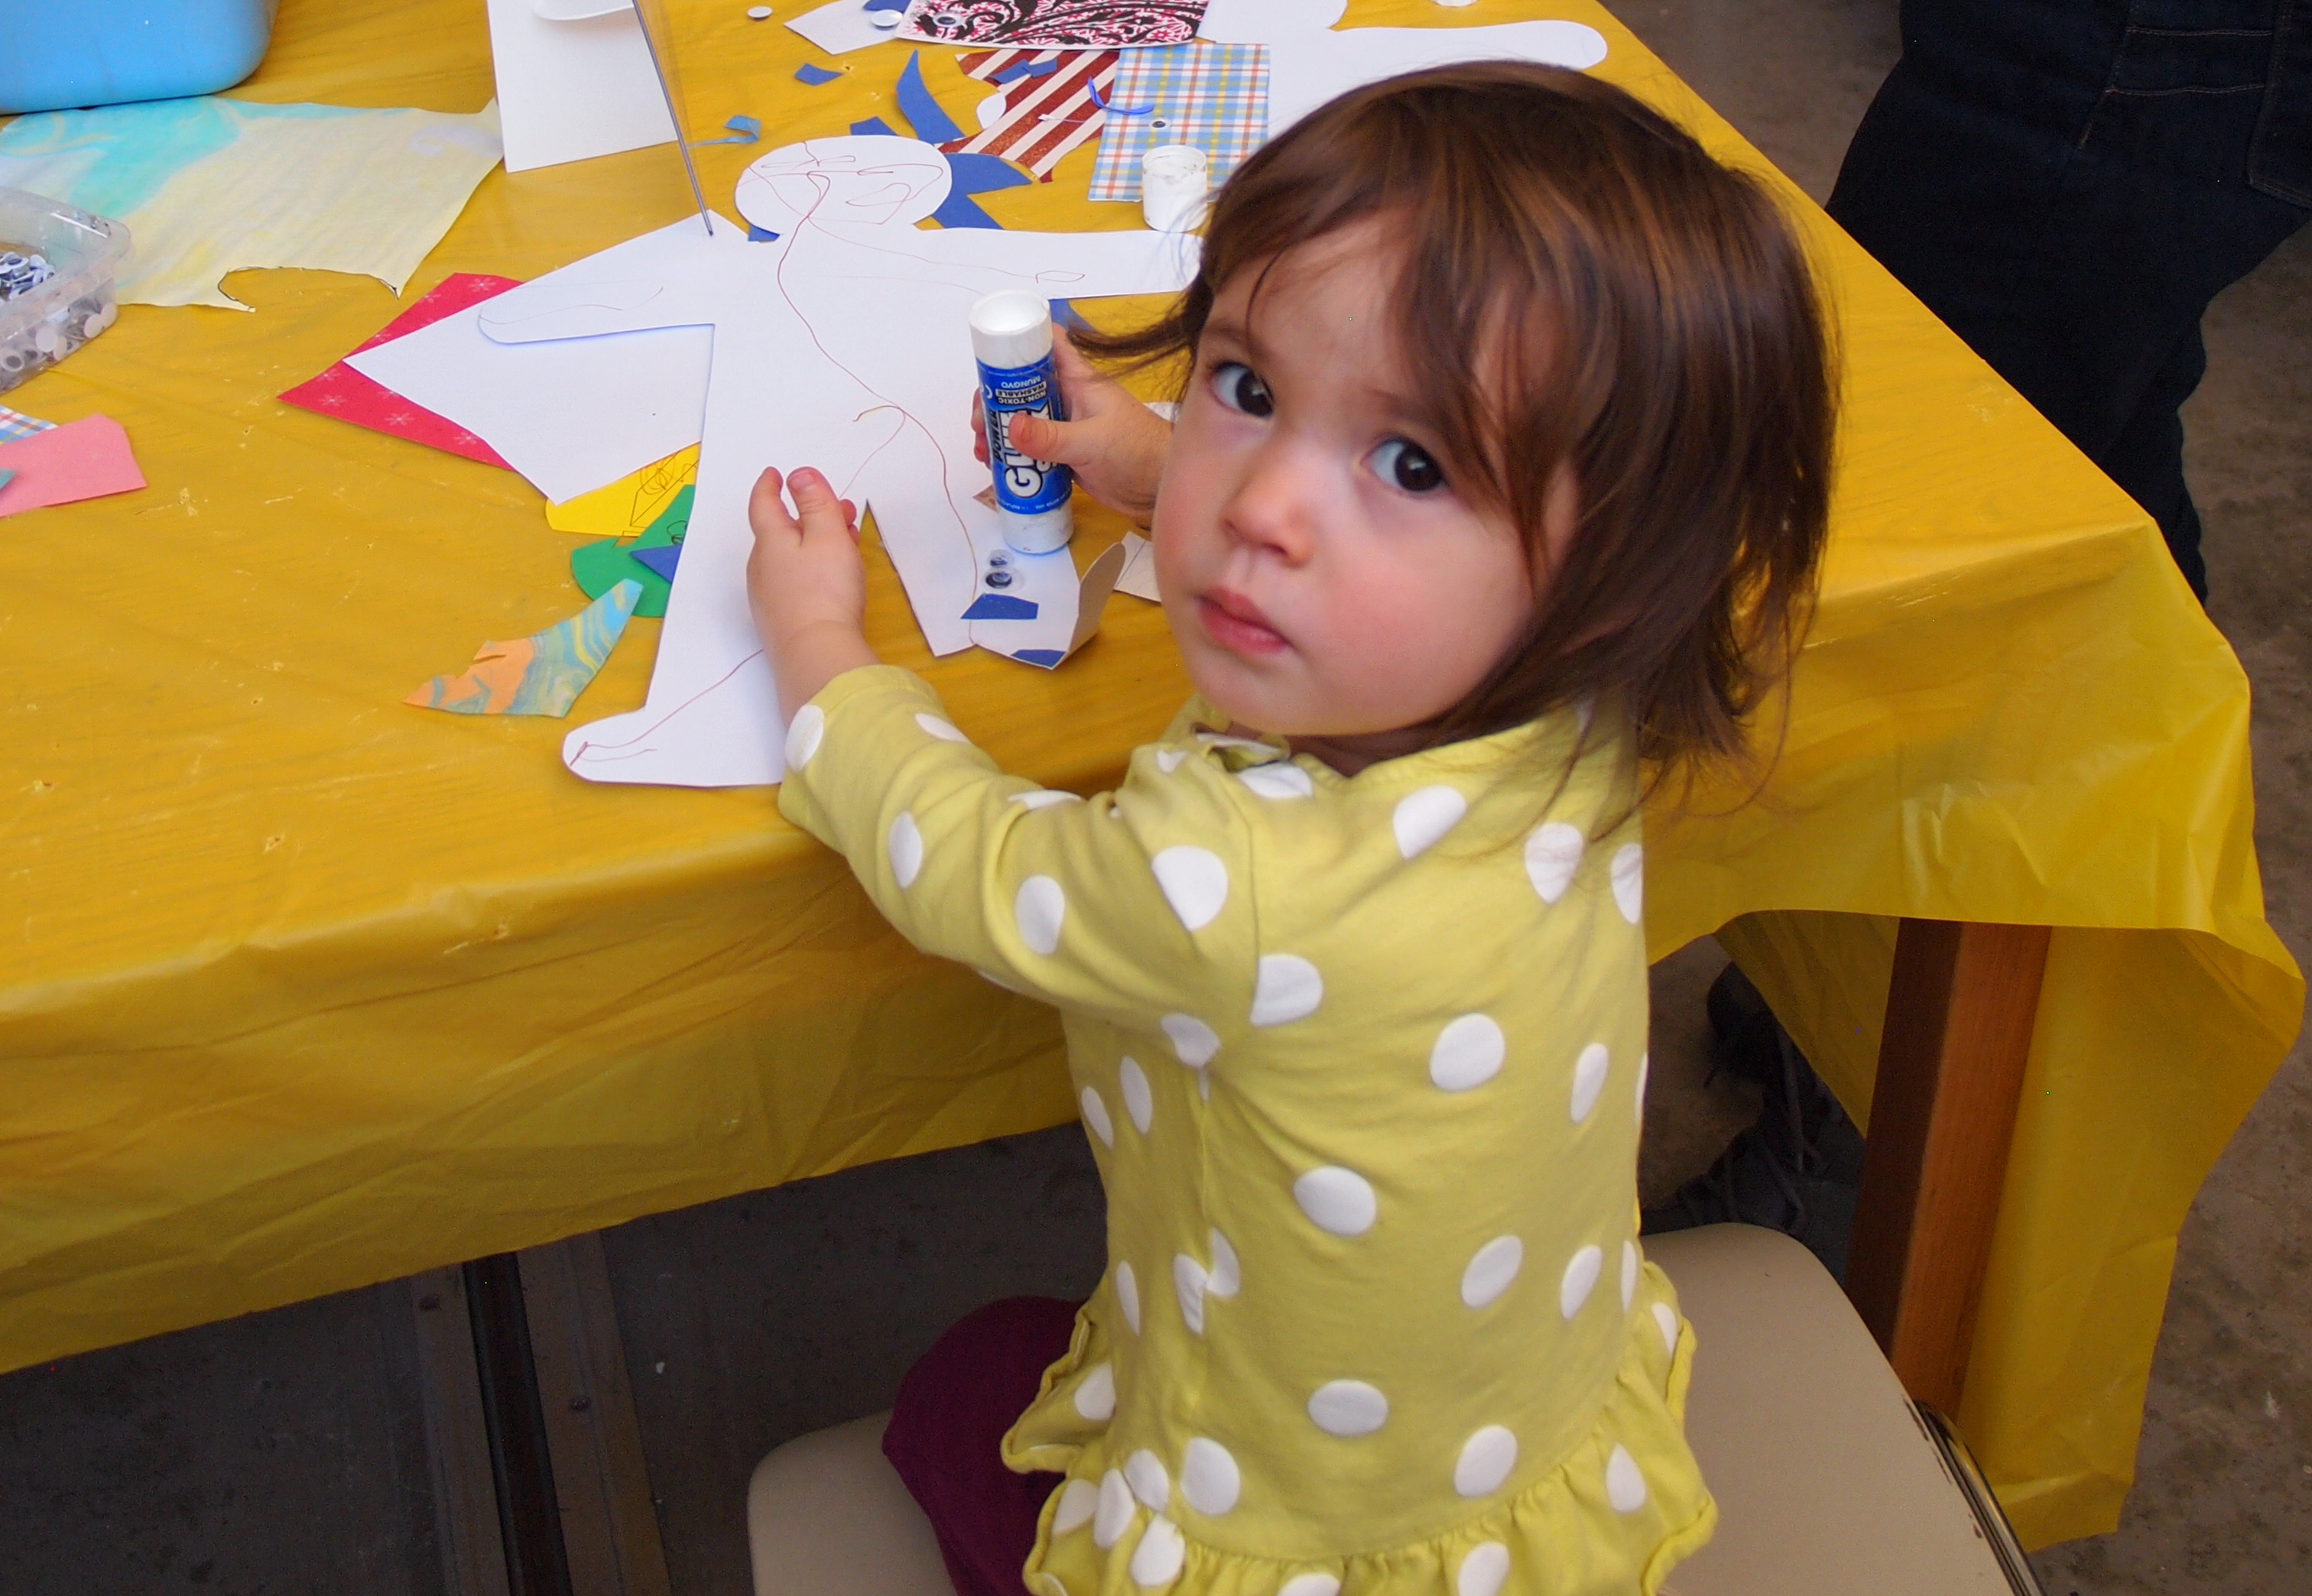 A young girl does crafts at a table